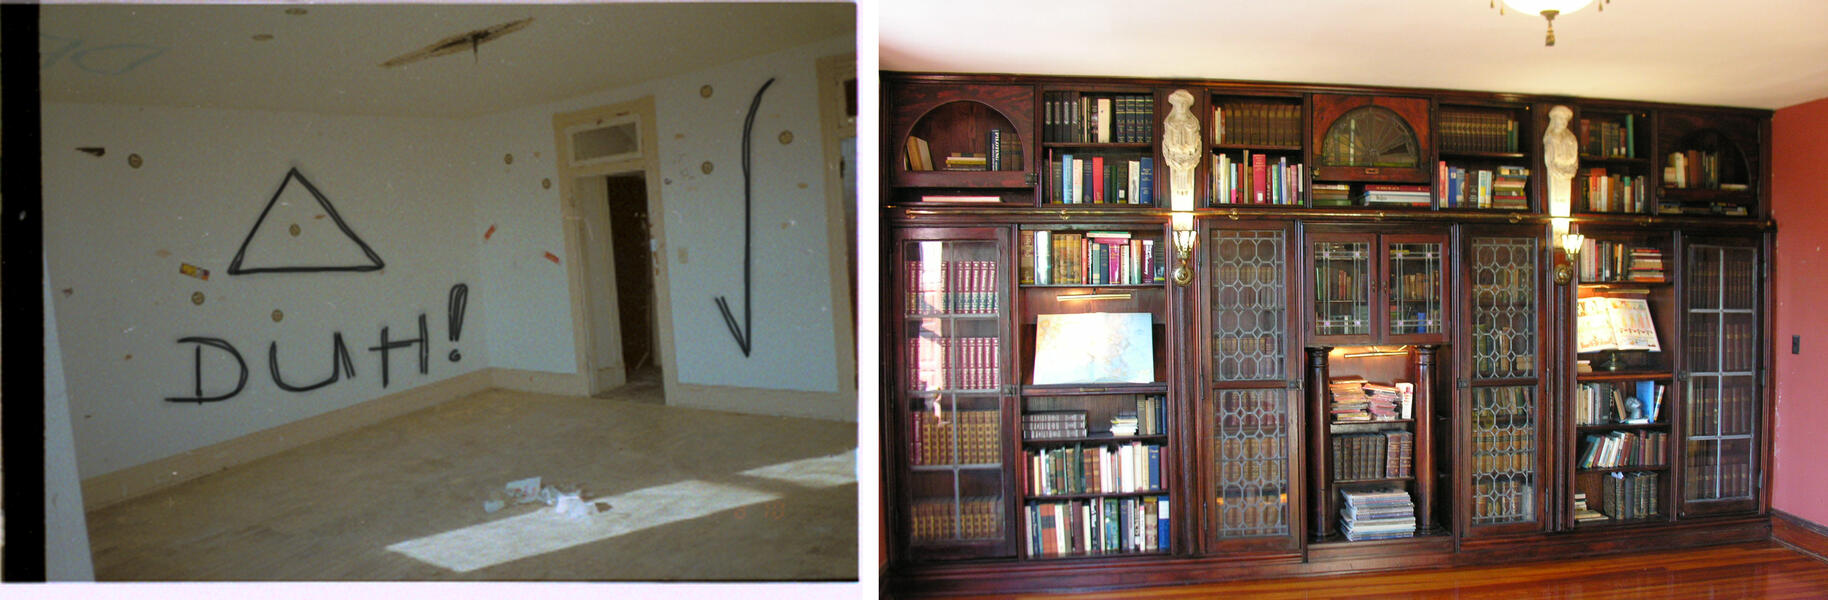 before / after library